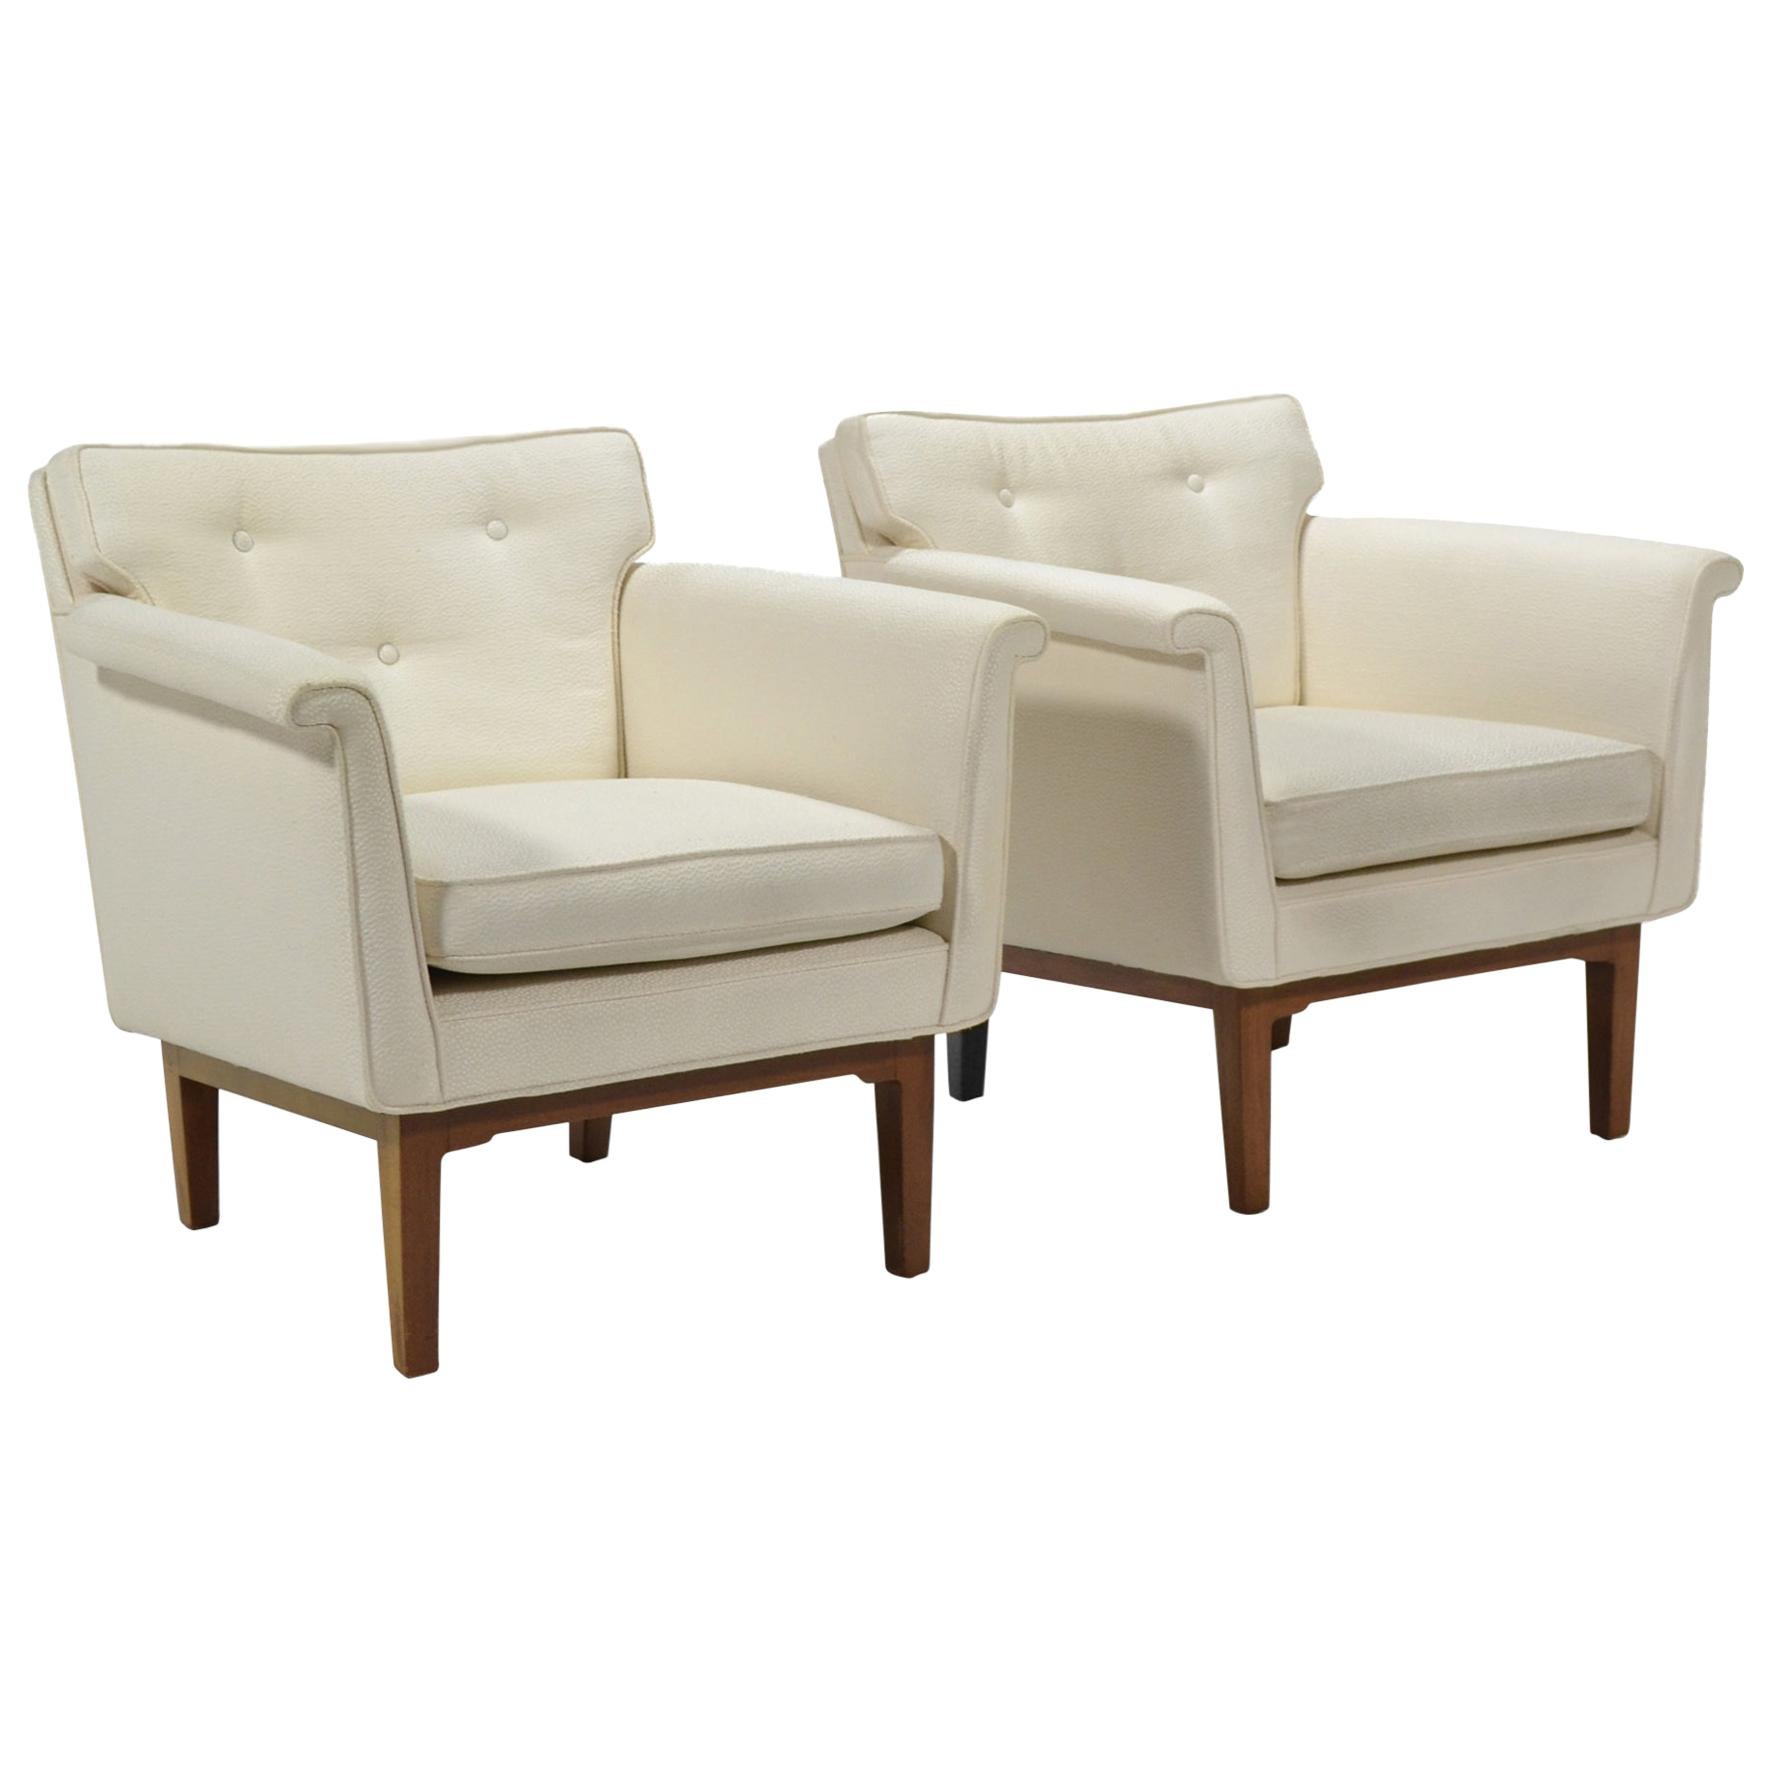 Edward Wormley Pair of Lounge Chairs by Dunbar